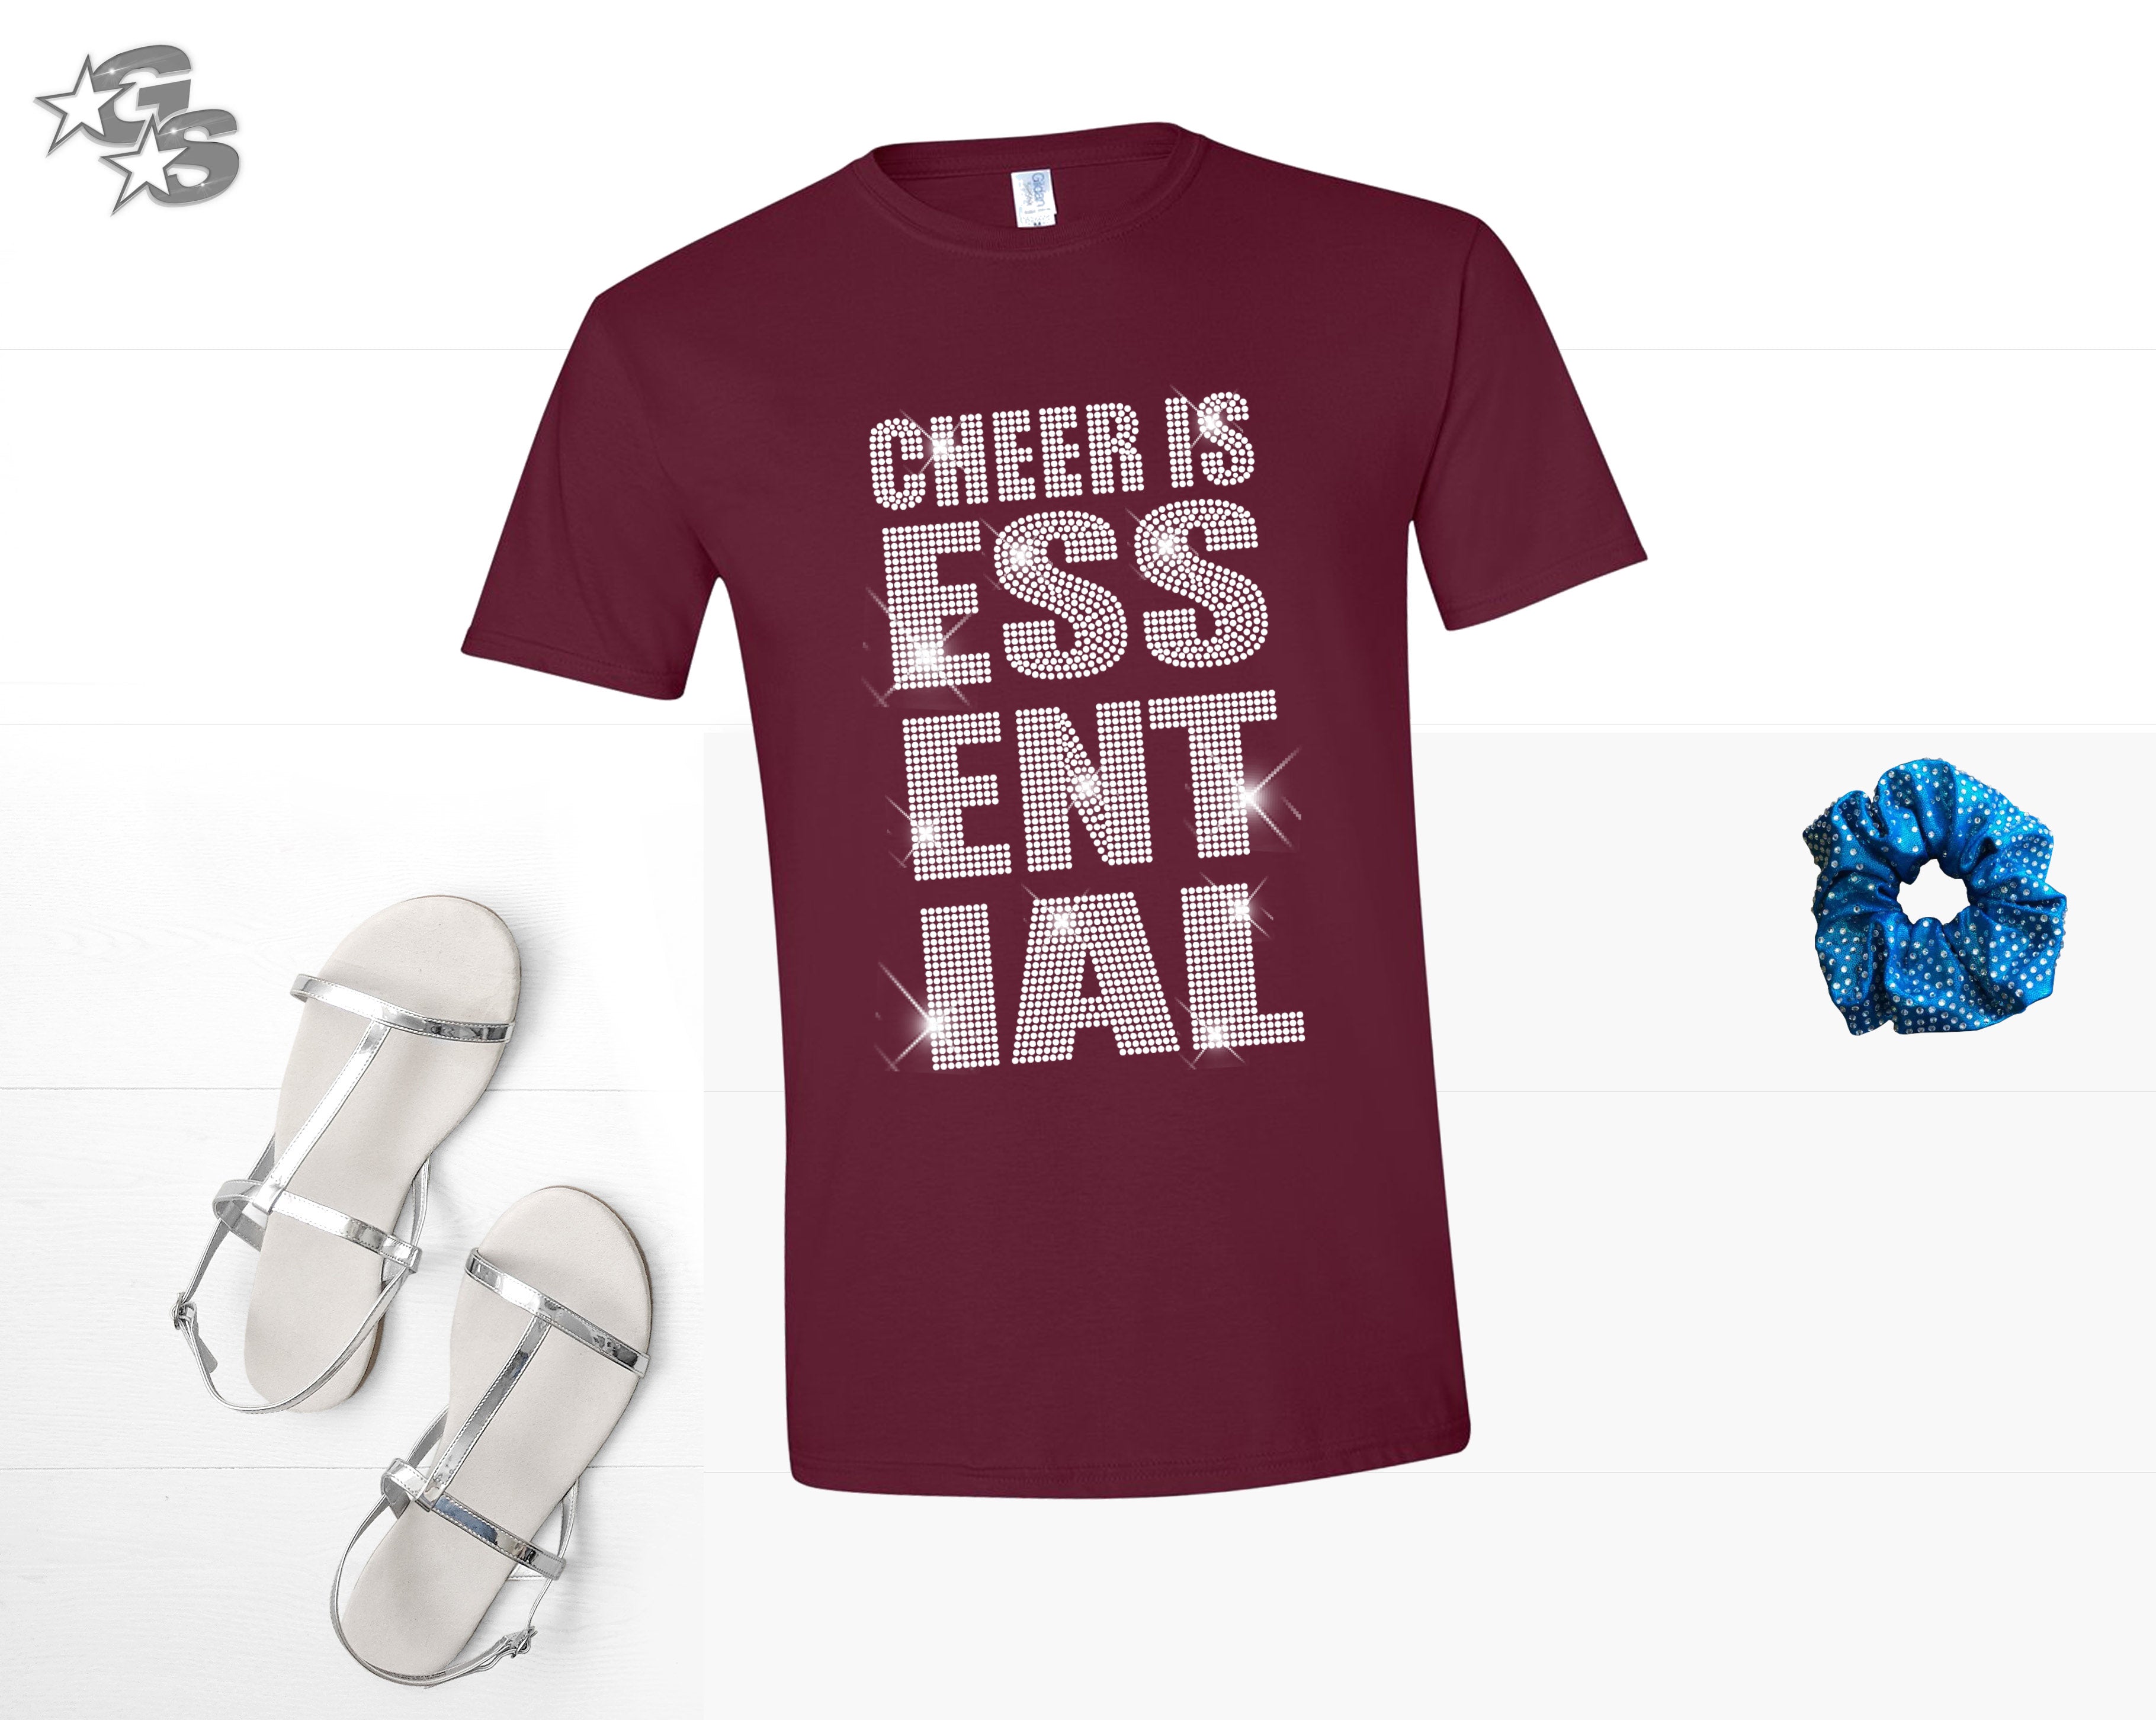 Cheer is Essential - Maroon Shirt - Cheer FX (Bling) - No Hashtag